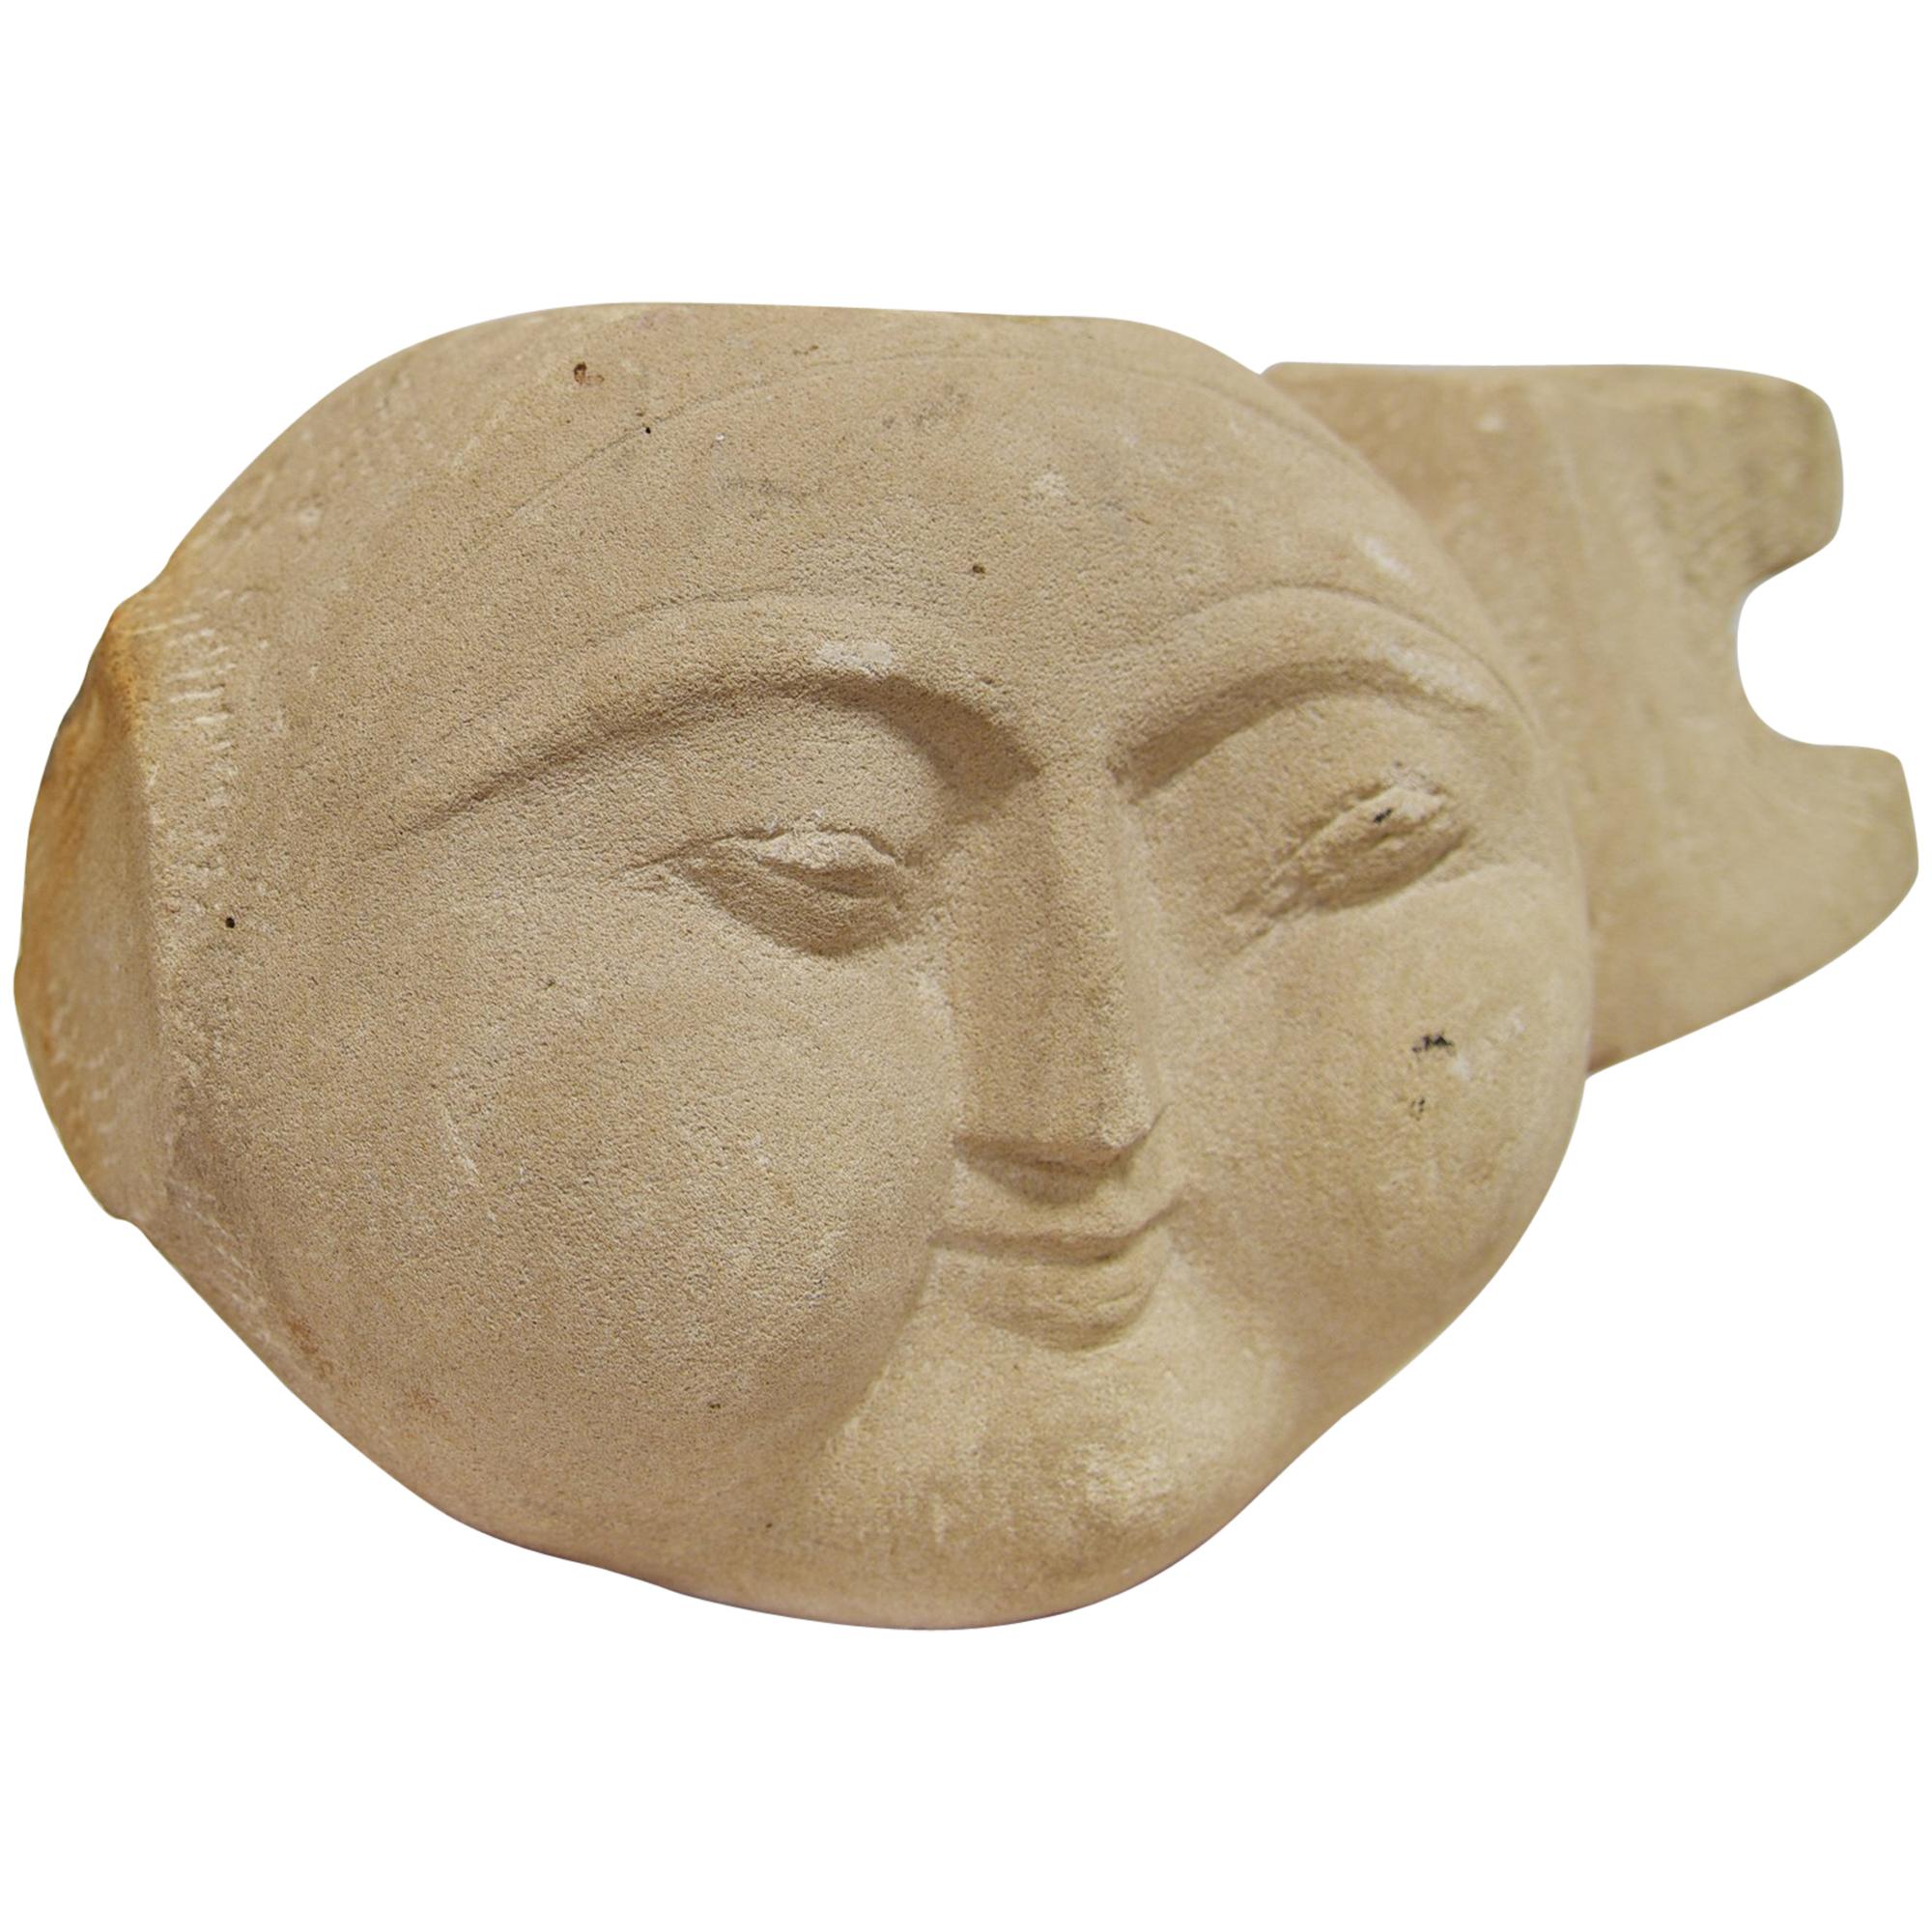 DIRACCA SCULPTURE - Hand-Carved Stone Head [SPAIN]